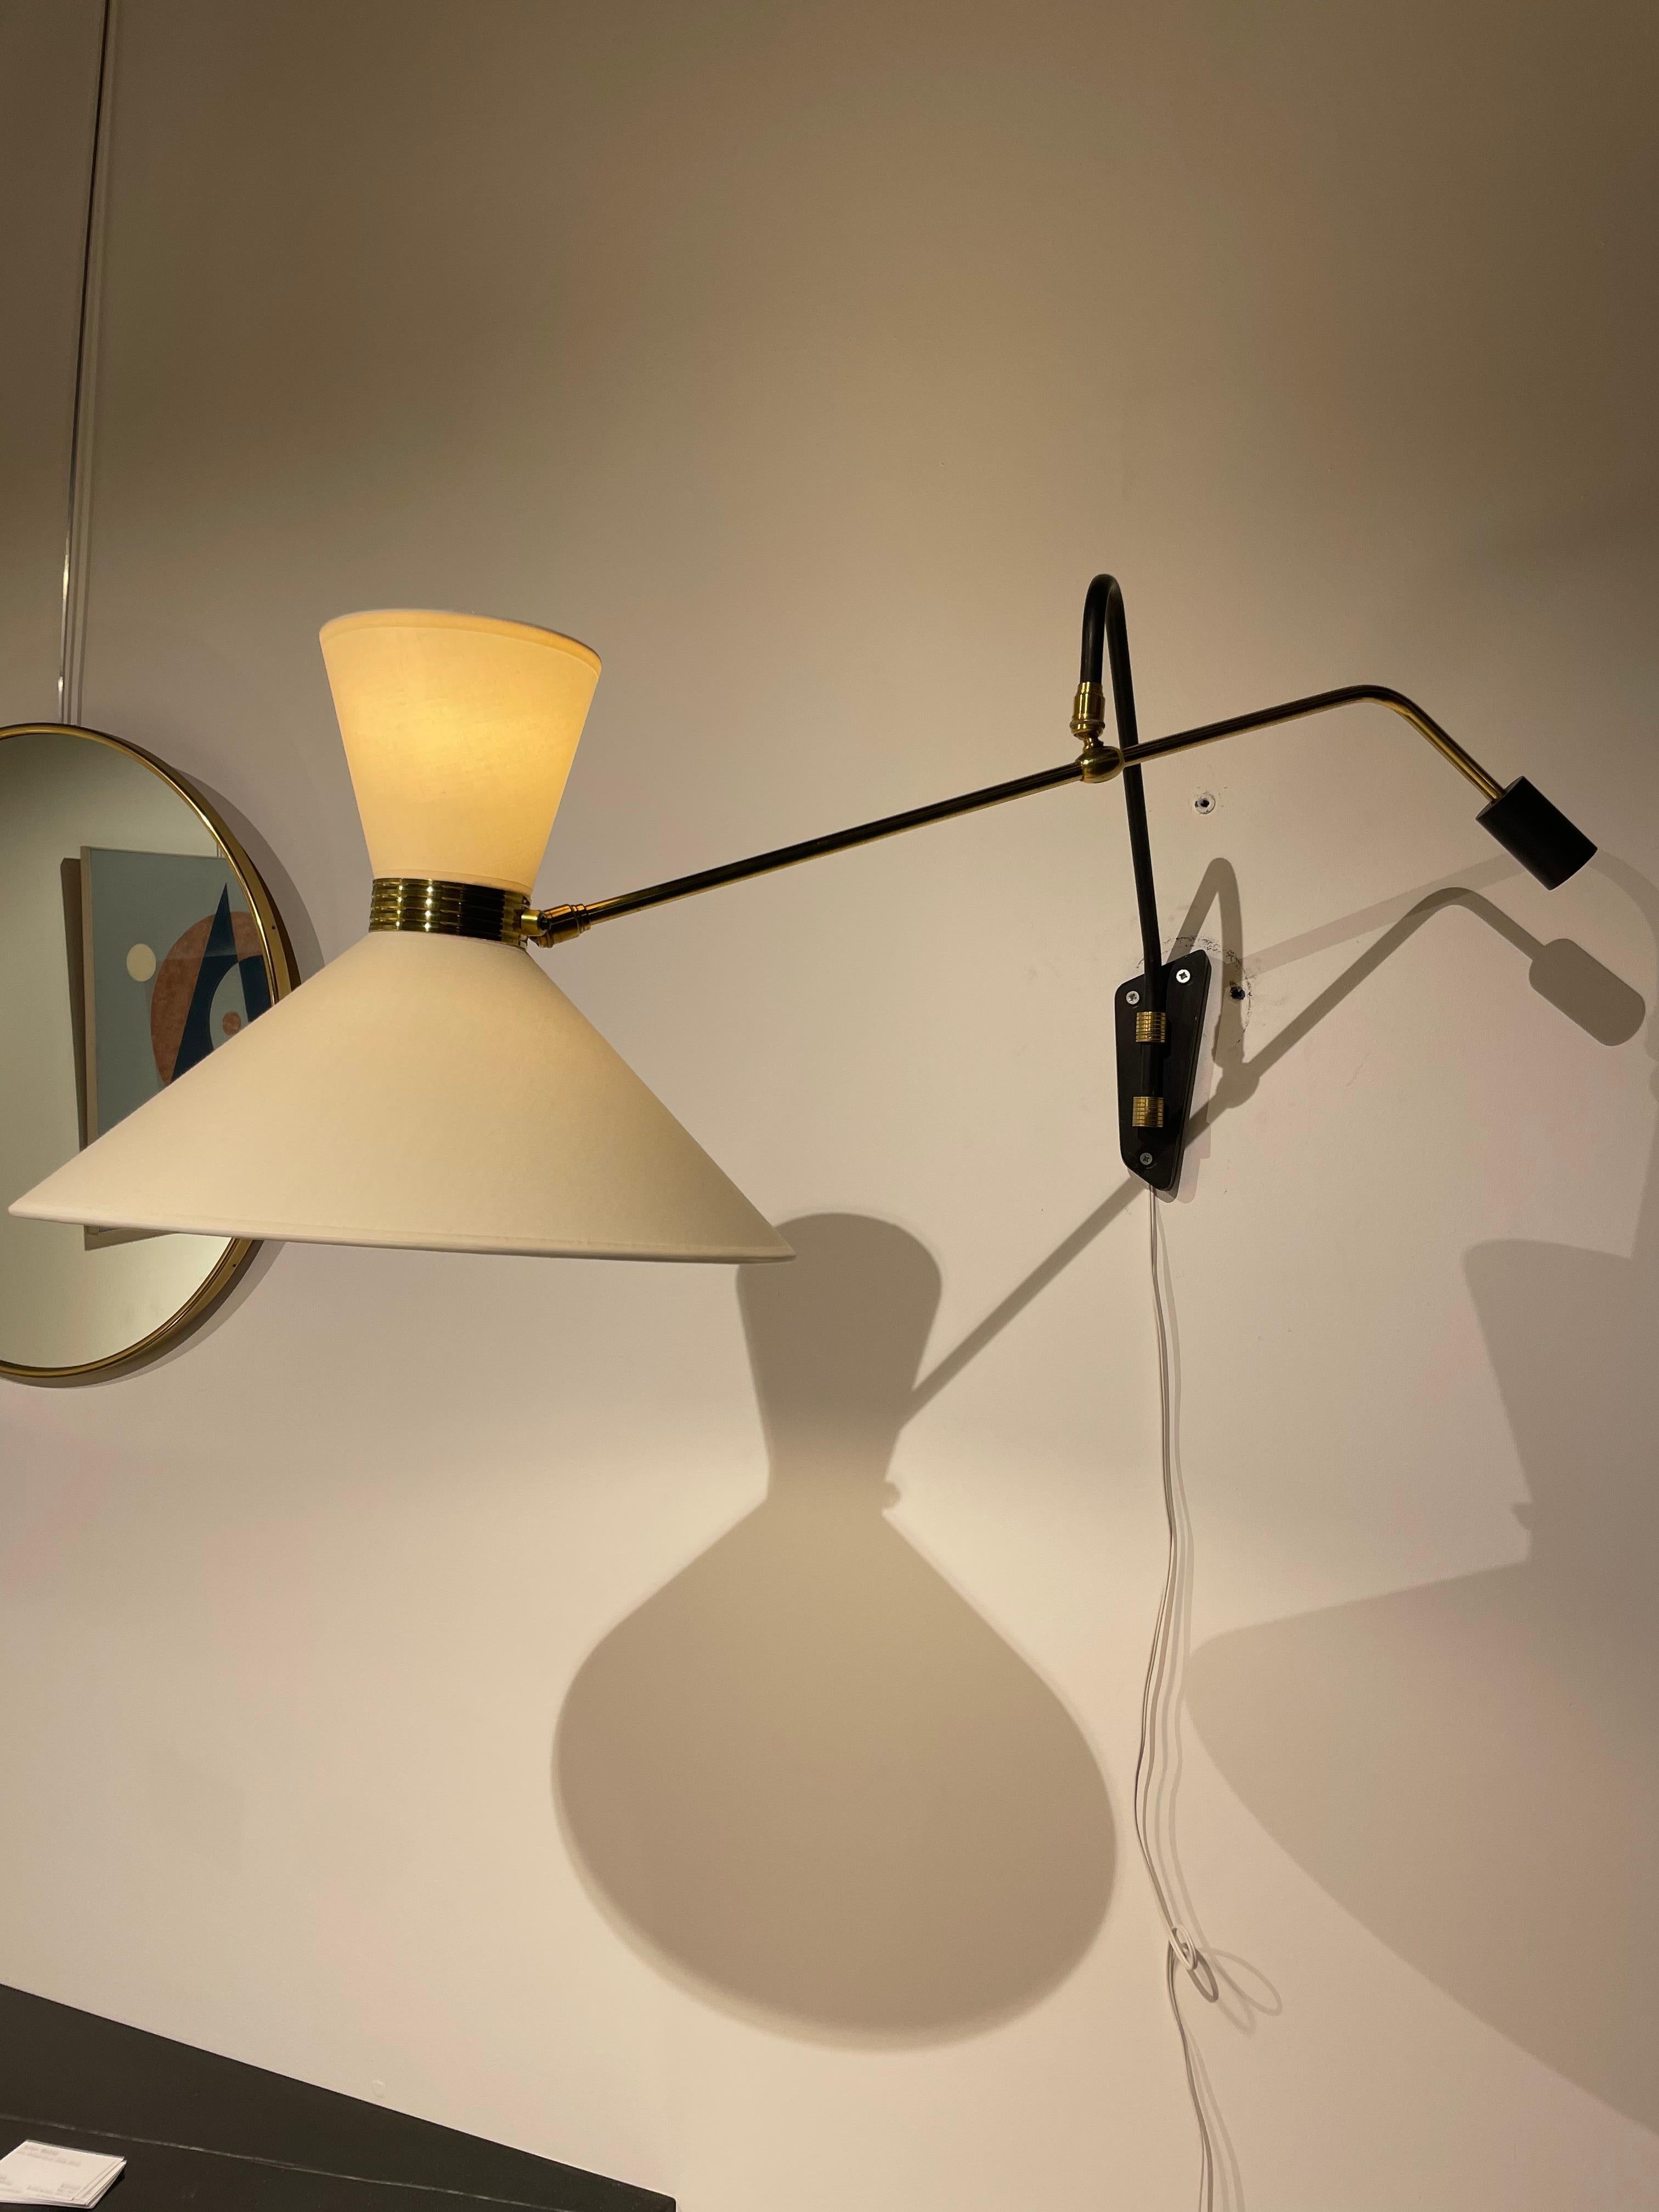 Arlus is a French lighting editor active from the early 1950s Associated with the modern movement by its achievements close to those of the first French designers 
Arlus has in particular popularized the intervention of lacquered tubular metal or